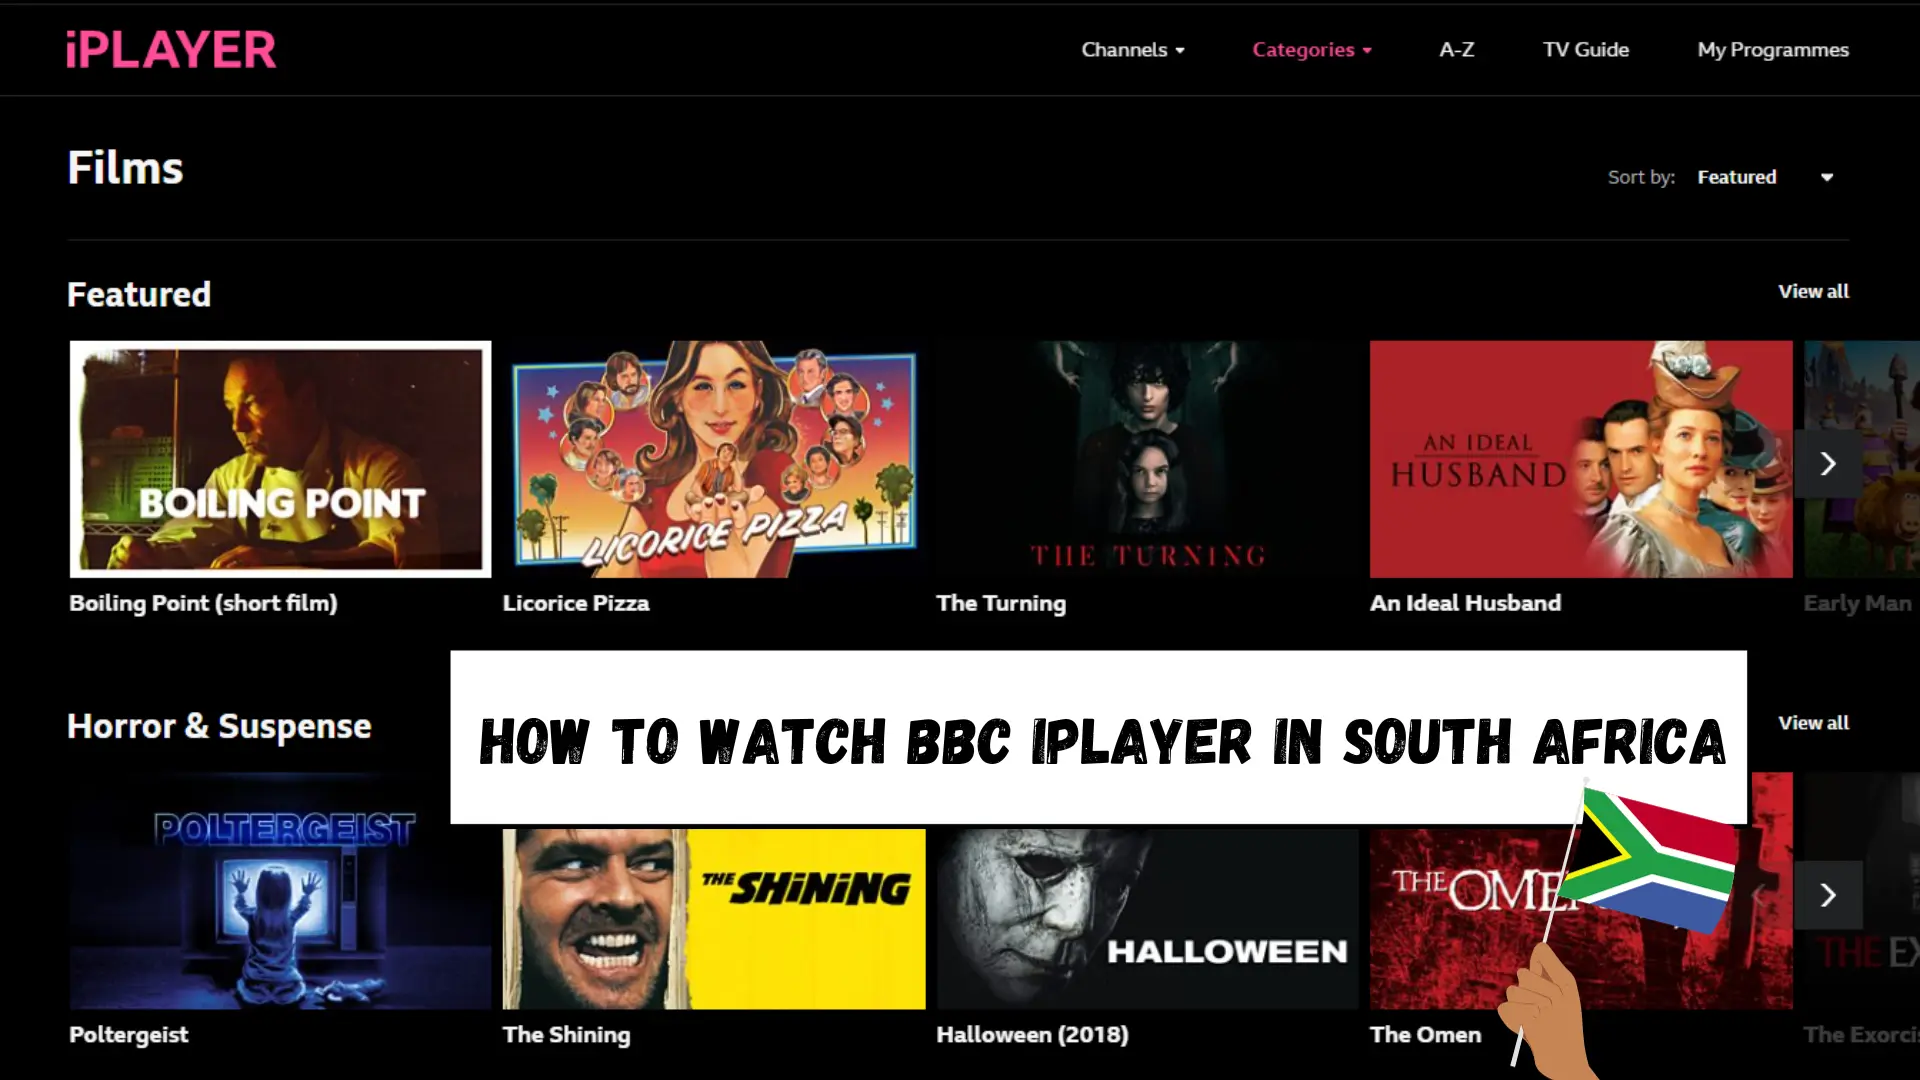 How to Watch BBC iPlayer in South Africa